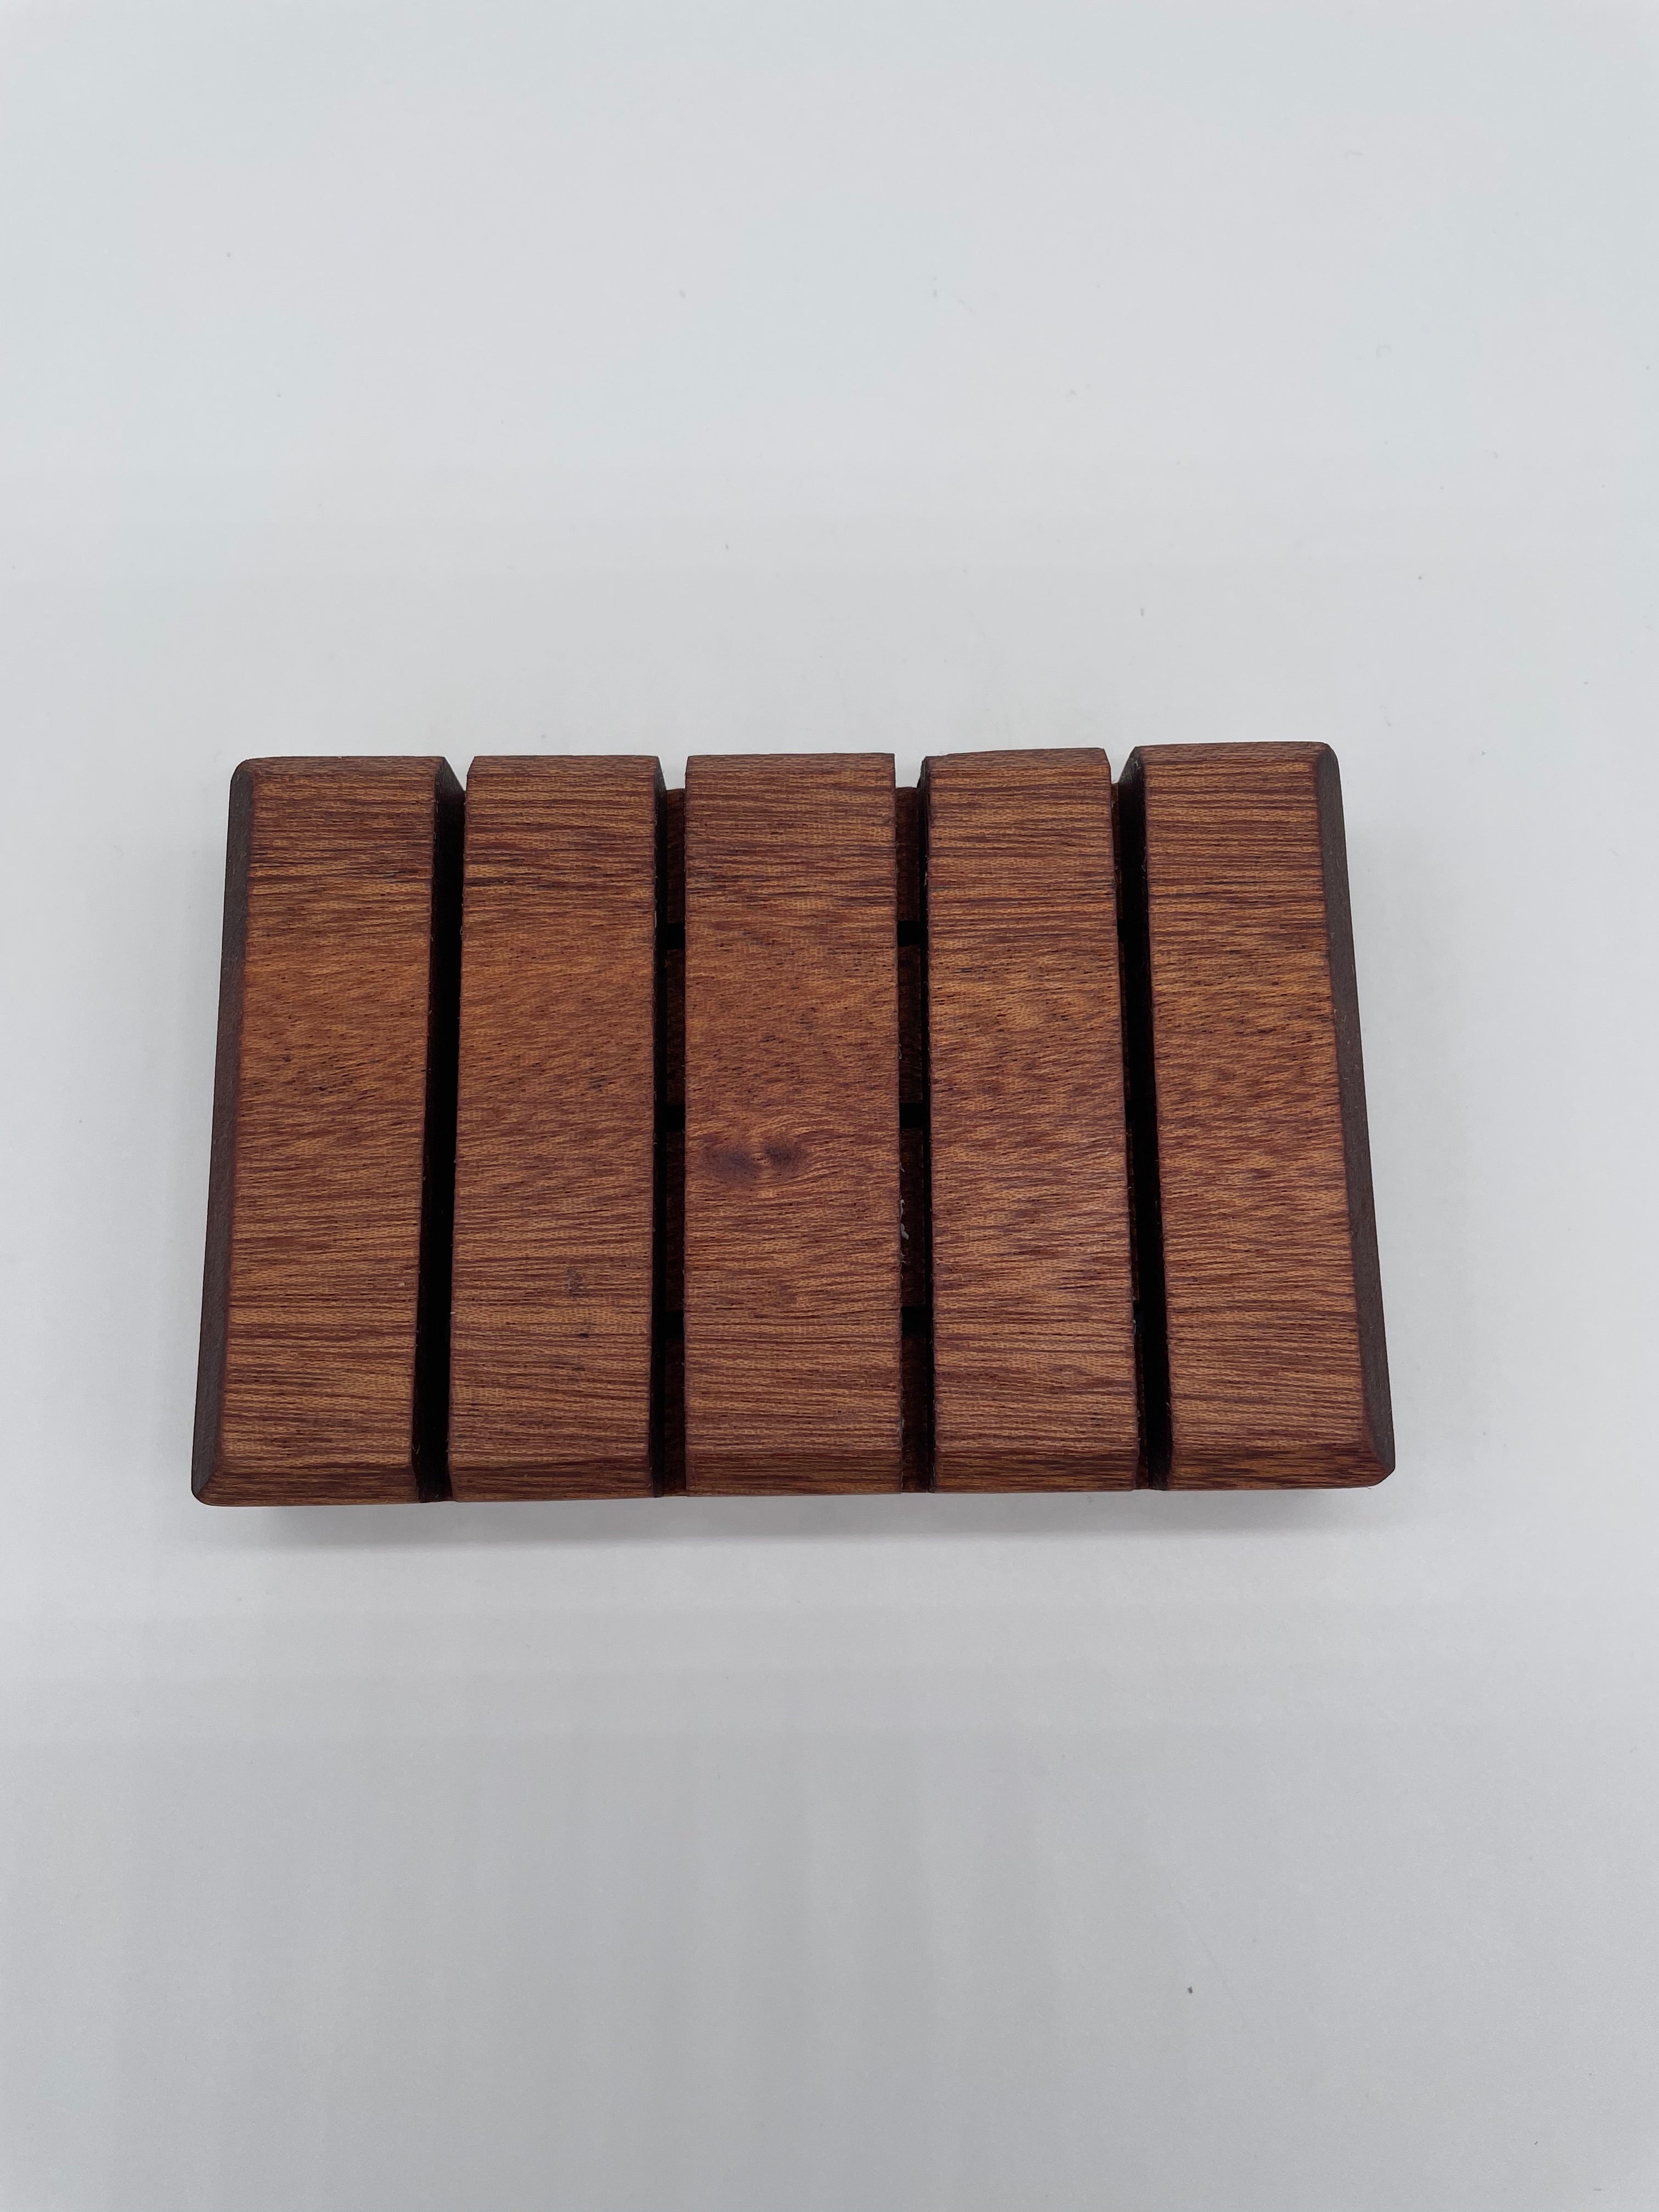 Handcrafted Wooden Soap Dish